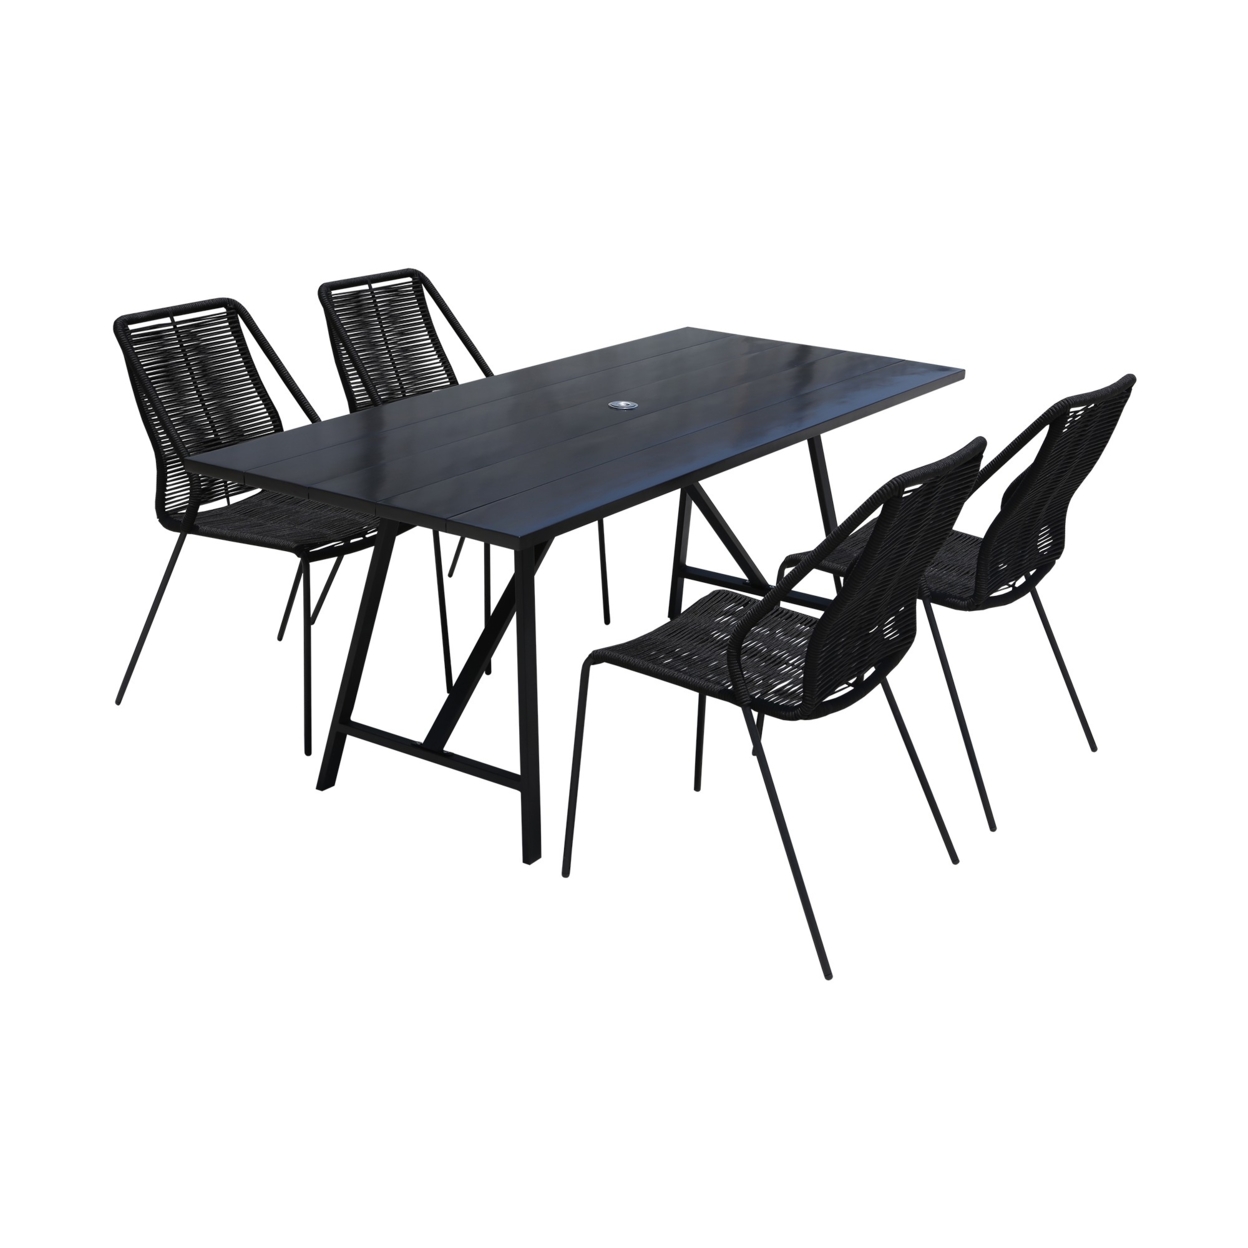 Zion 5 Piece Dining Table And Gray Rope Chairs, Black Rectangular Wood Top- Saltoro Sherpi